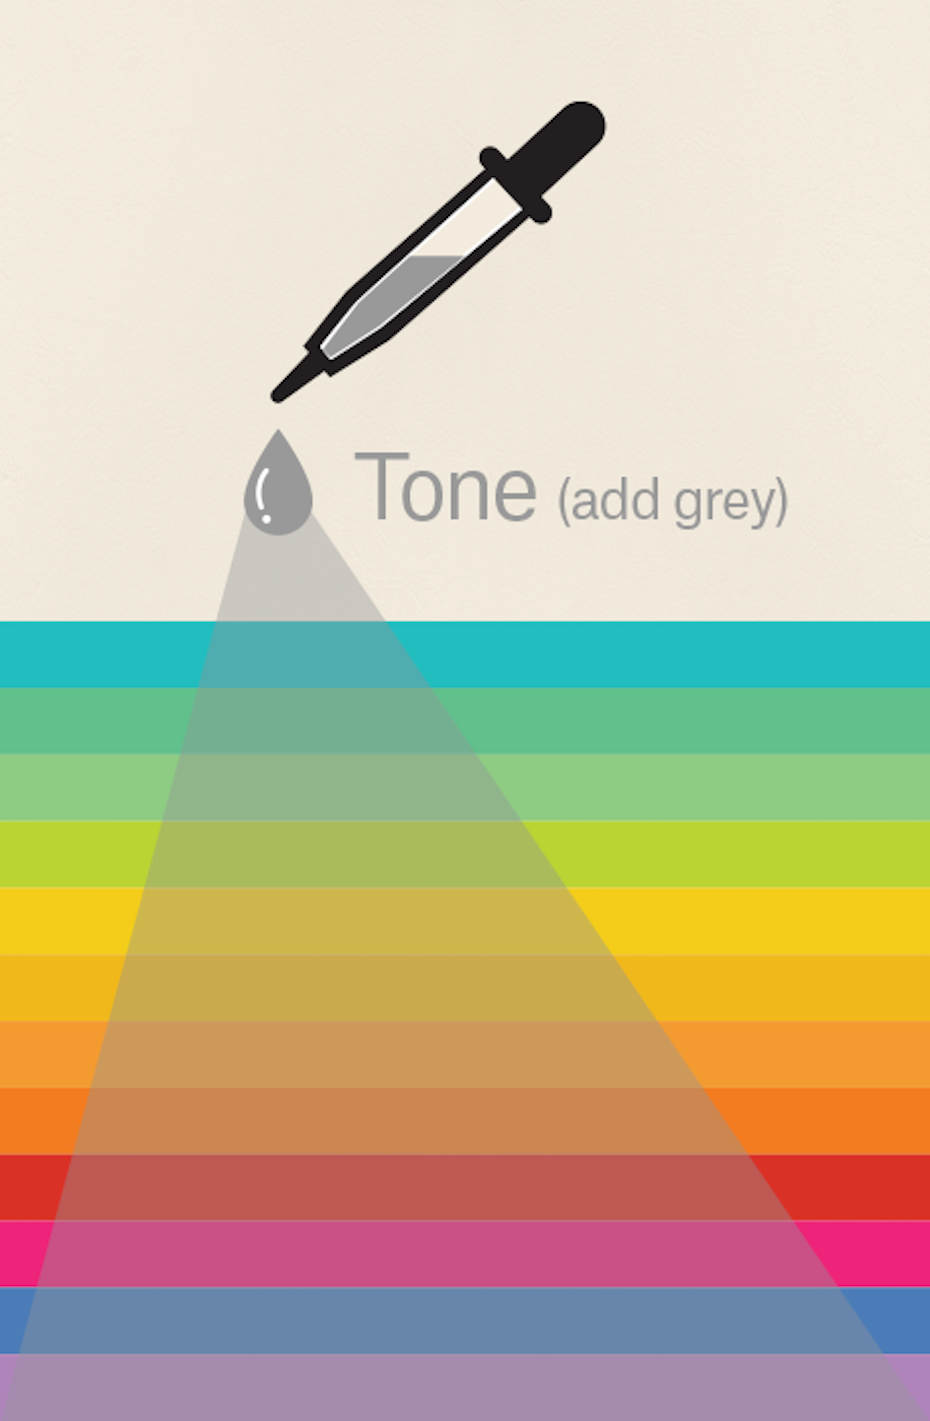 10 Essential Color Theory Books for Graphic Designers and Artists